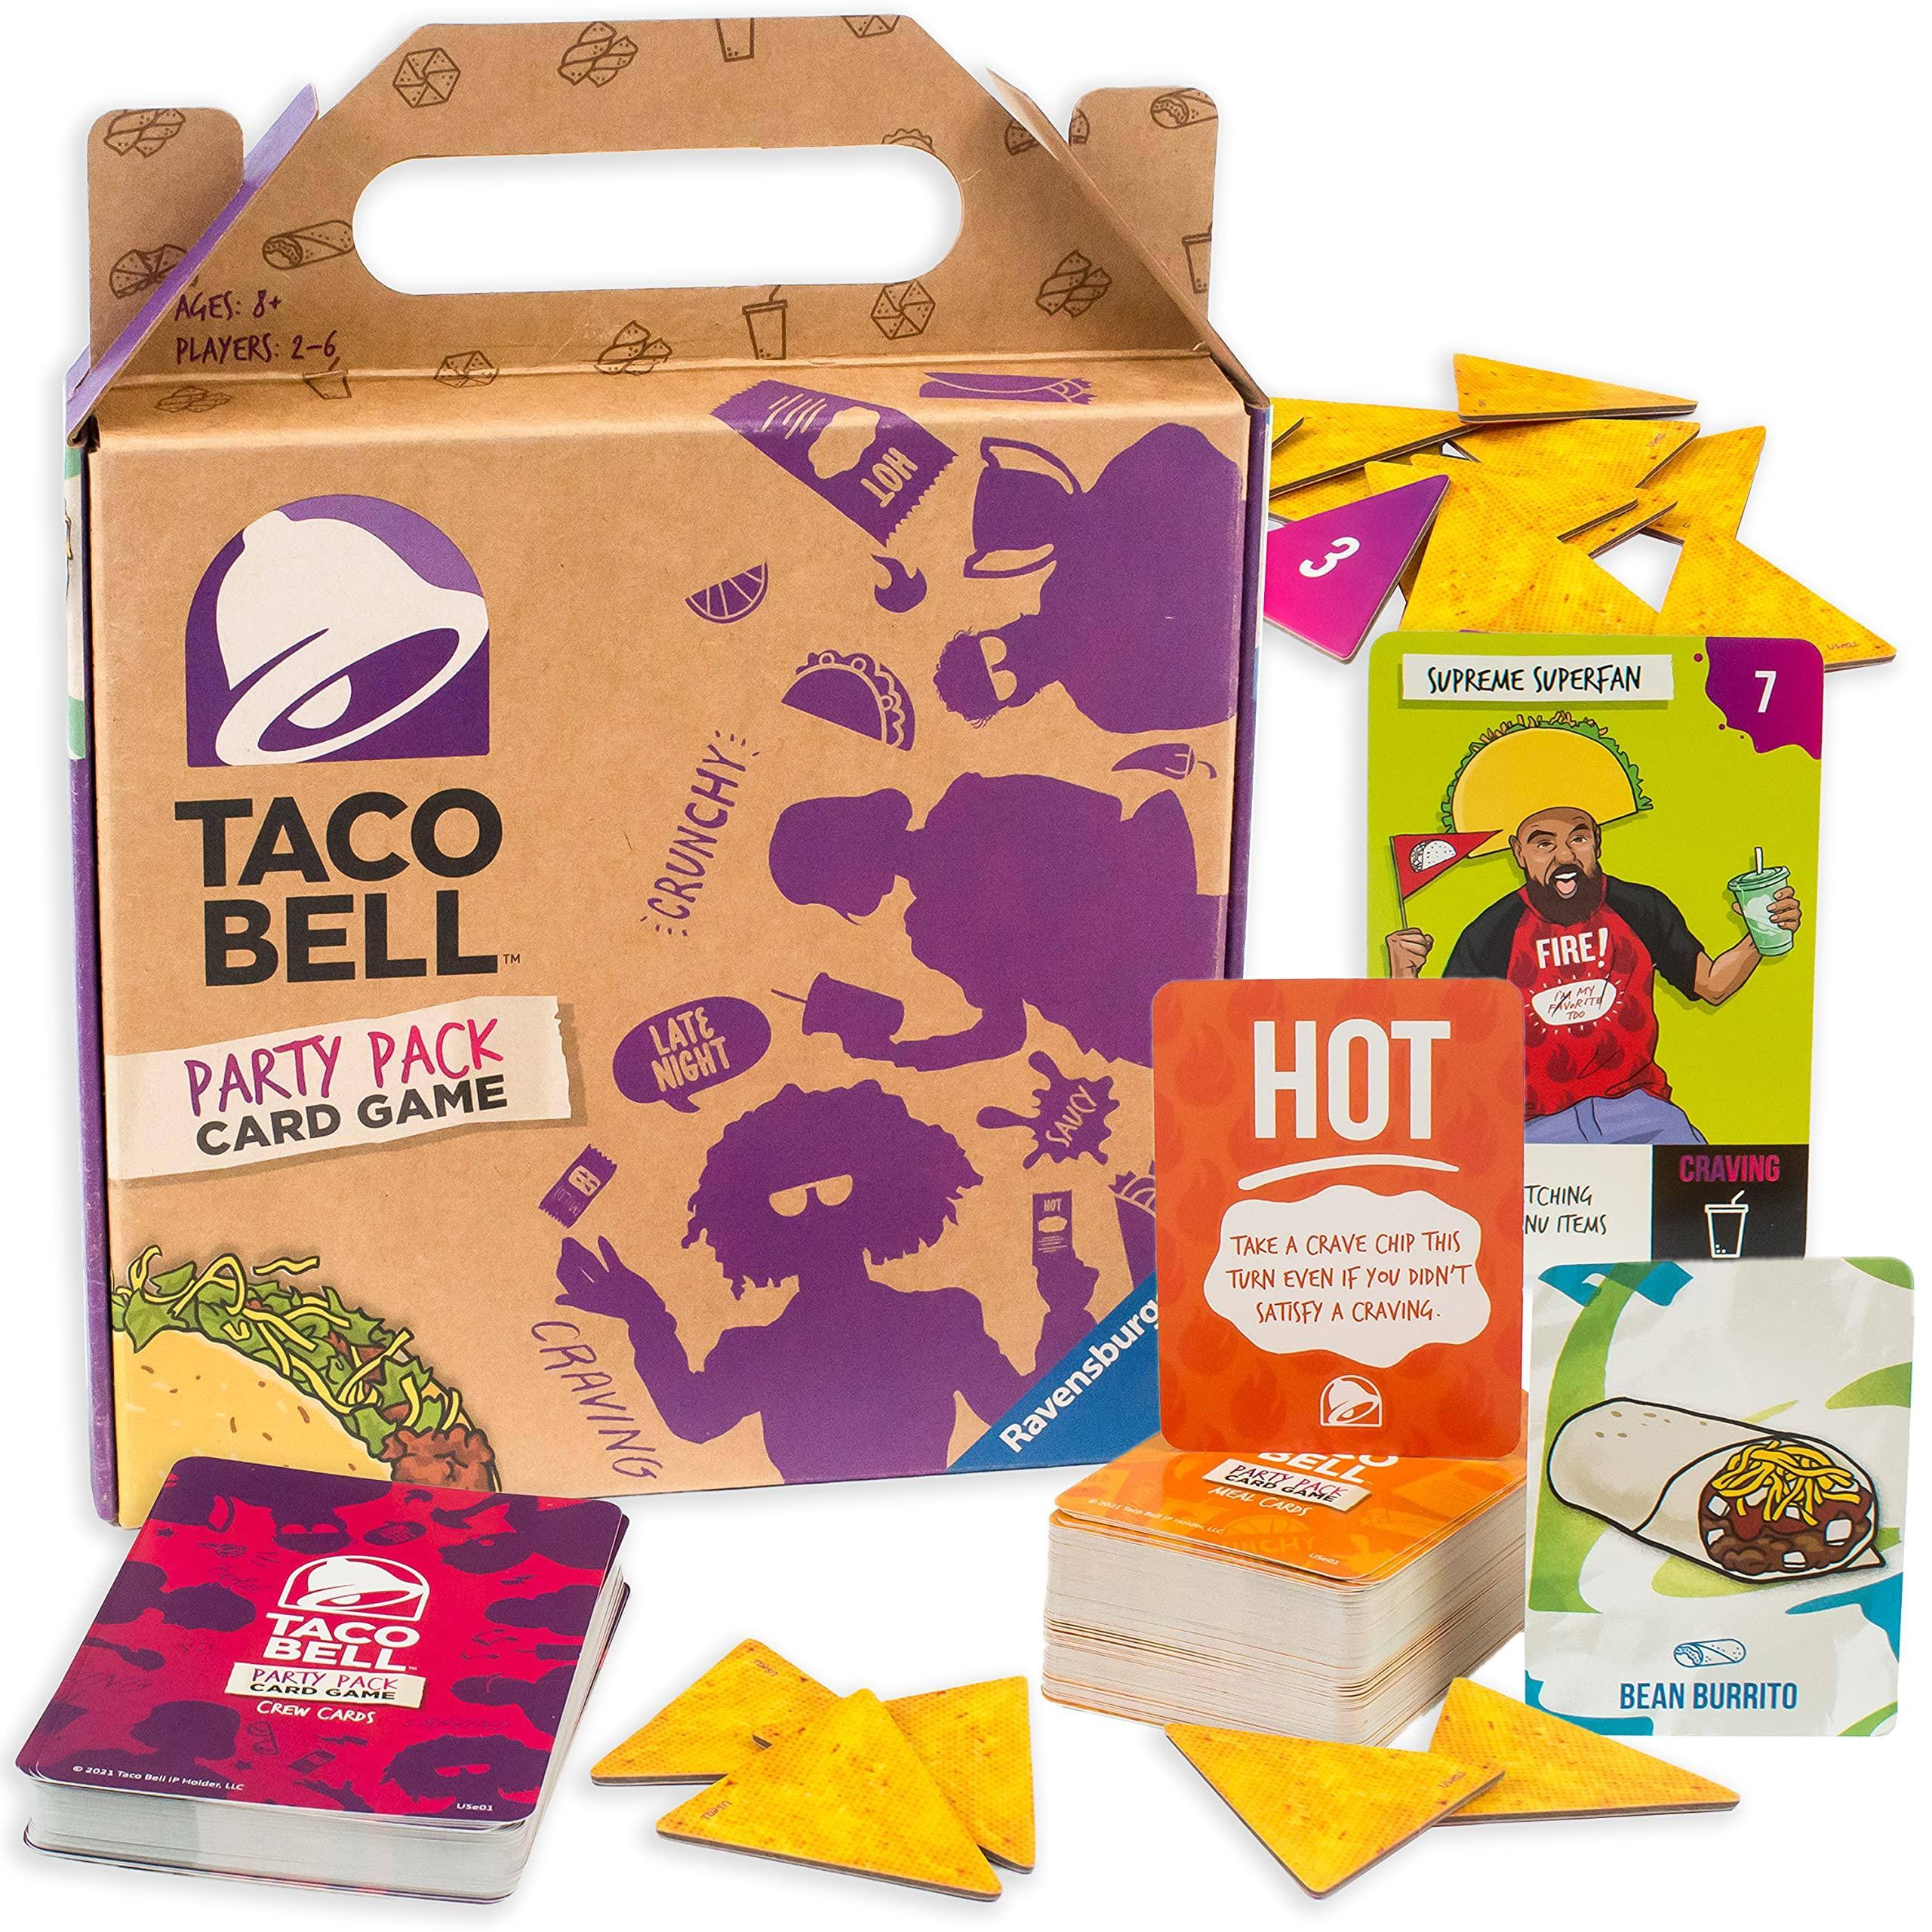 Ravensburger Taco Bell Party Pack Card Game For Ages 8 & Up - A Fun And Fast Party Card Game